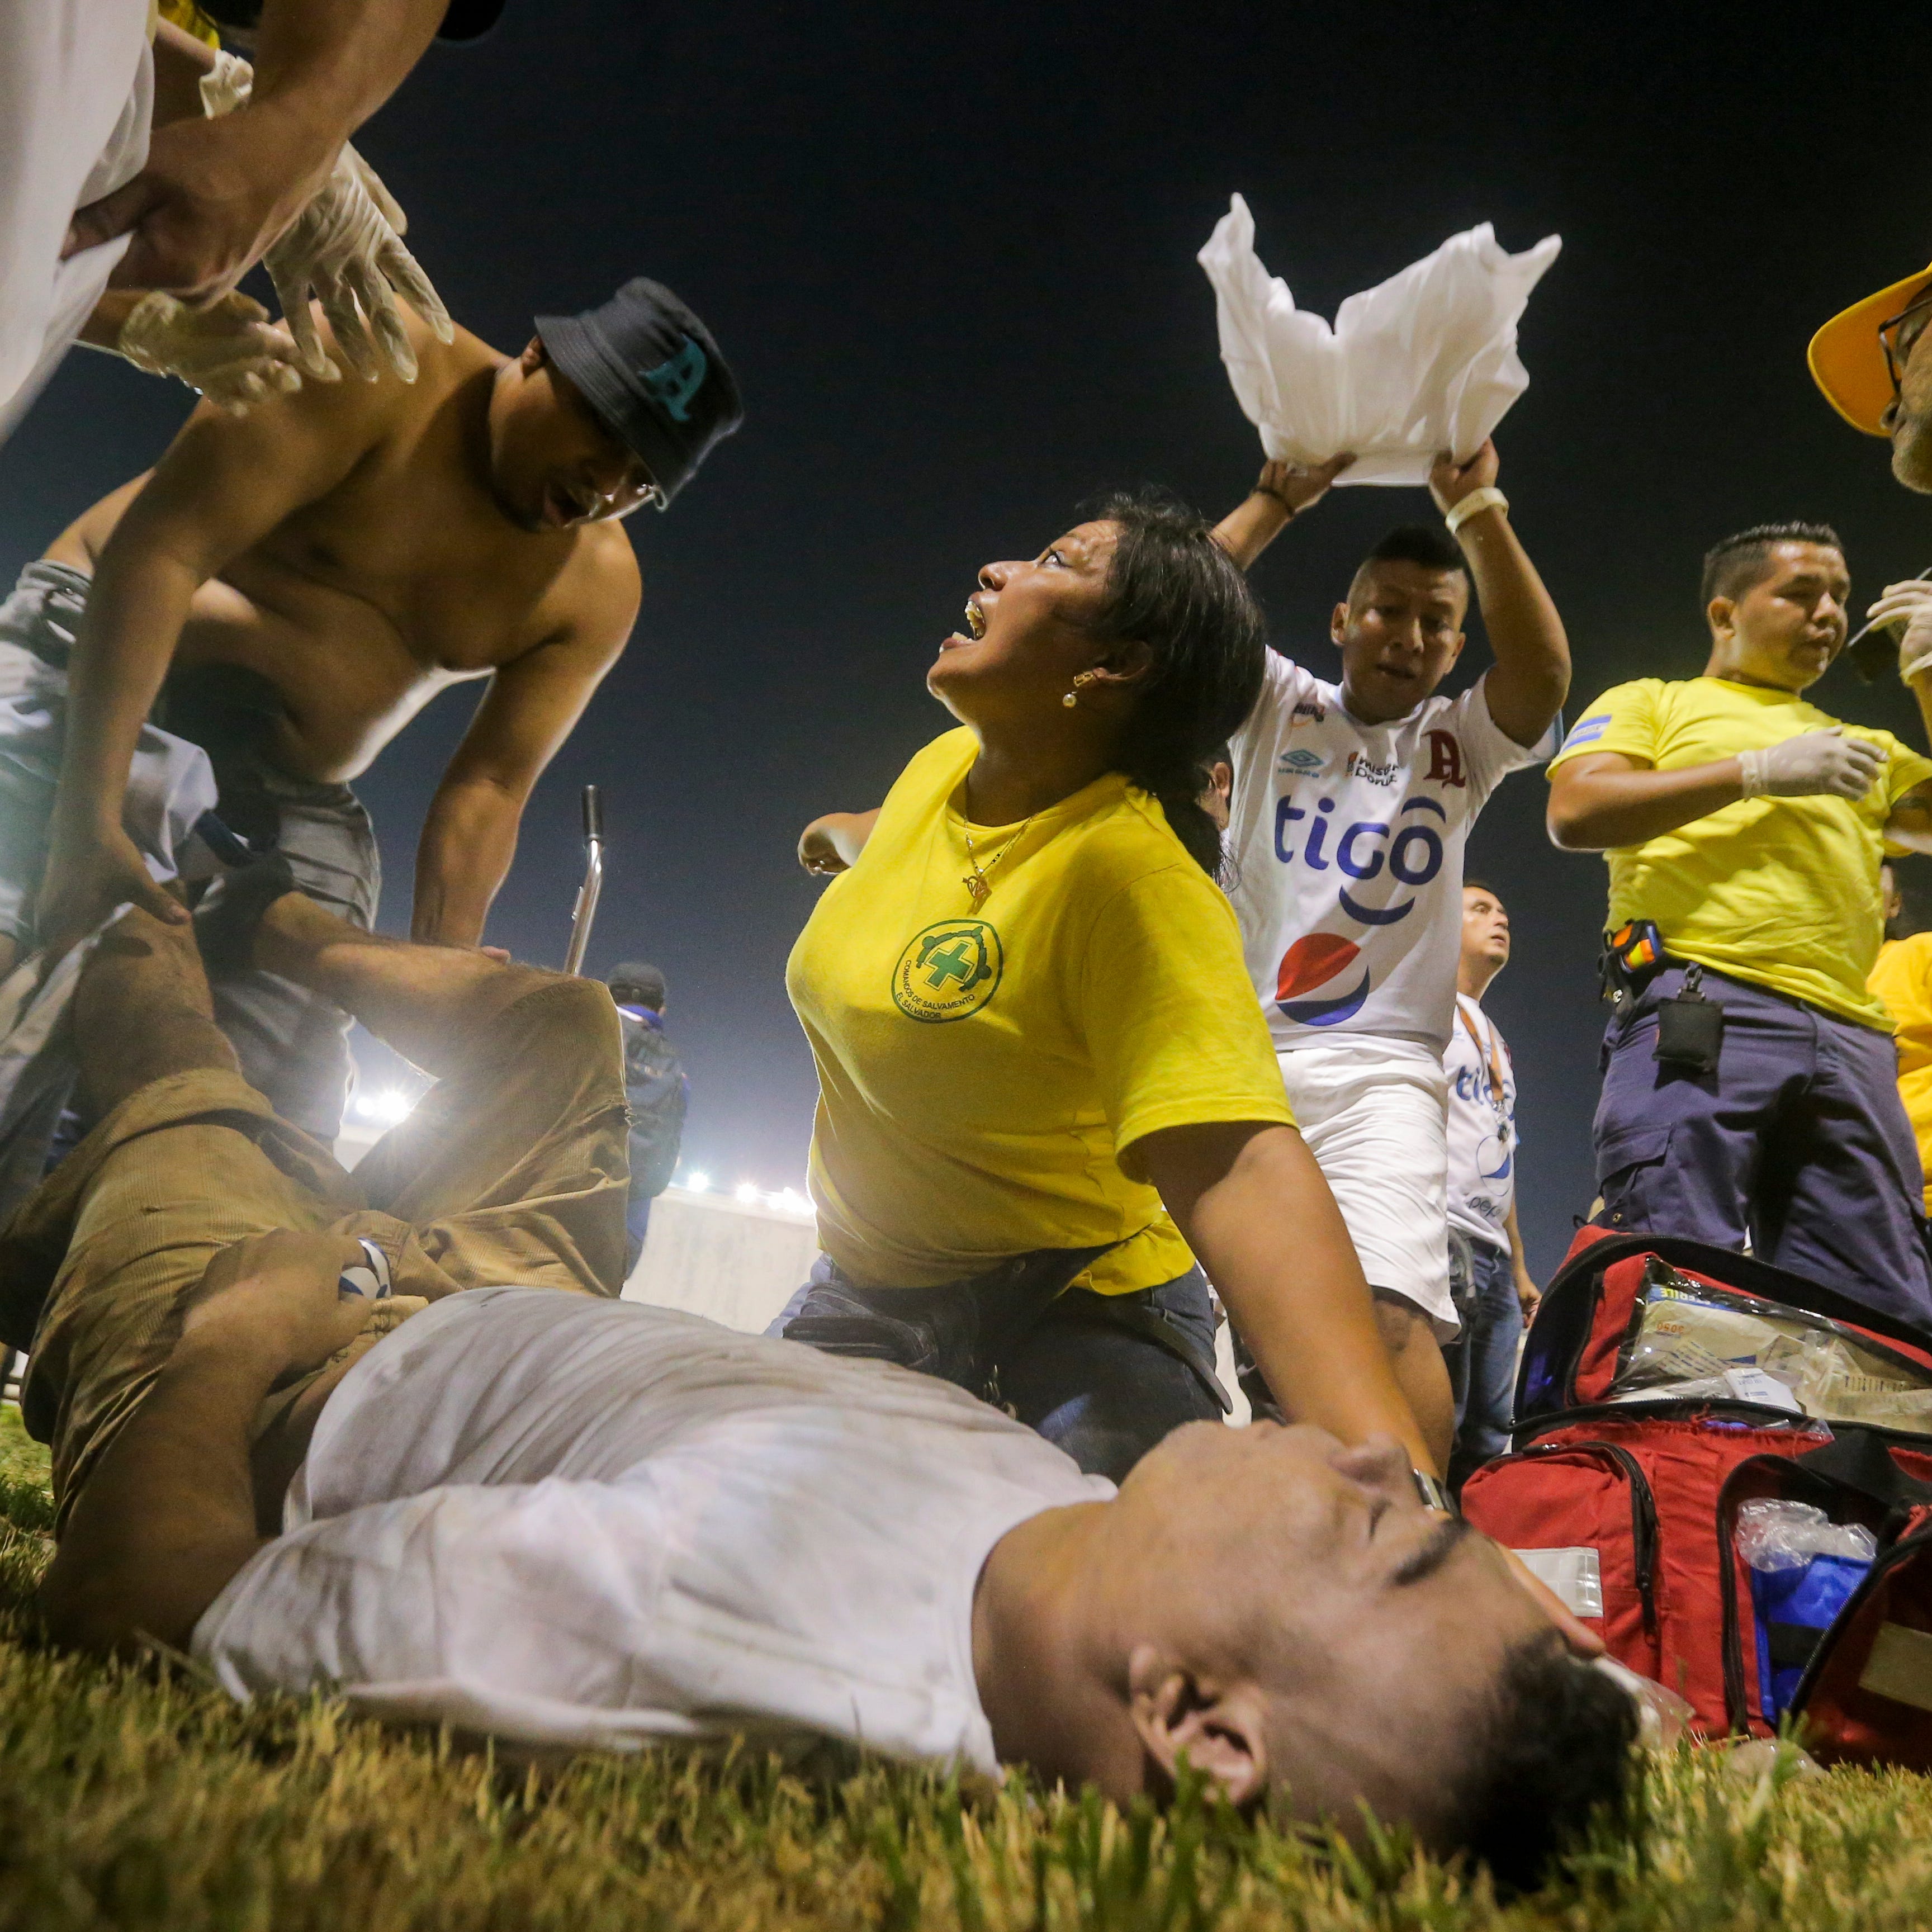 Rescuers attend an injured fan lying on the field of the Cuscatlan stadium in San Salvador, El Salvador.